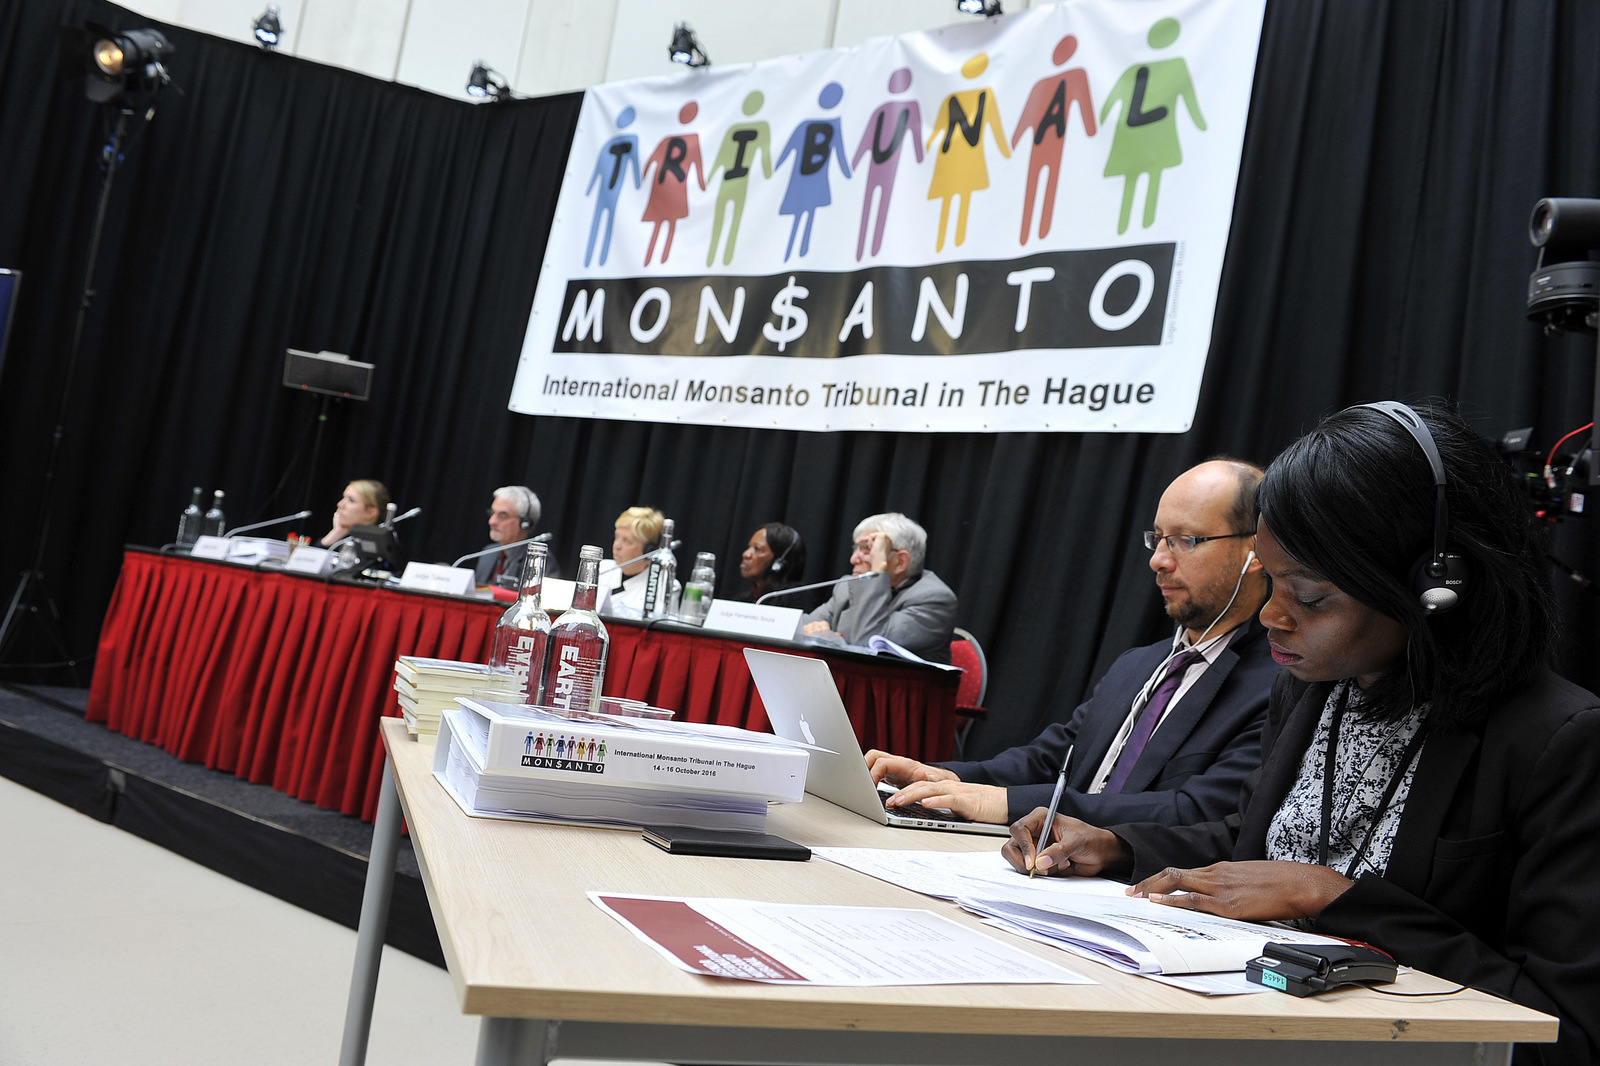 Judges, witnesses and experts gather for the first session of the People's Assembly, the hearings of the Monsanto Tribunal at the Hague in the Netherlands. (Photo: Monsanto Tribunal Follow/flickr/cc)